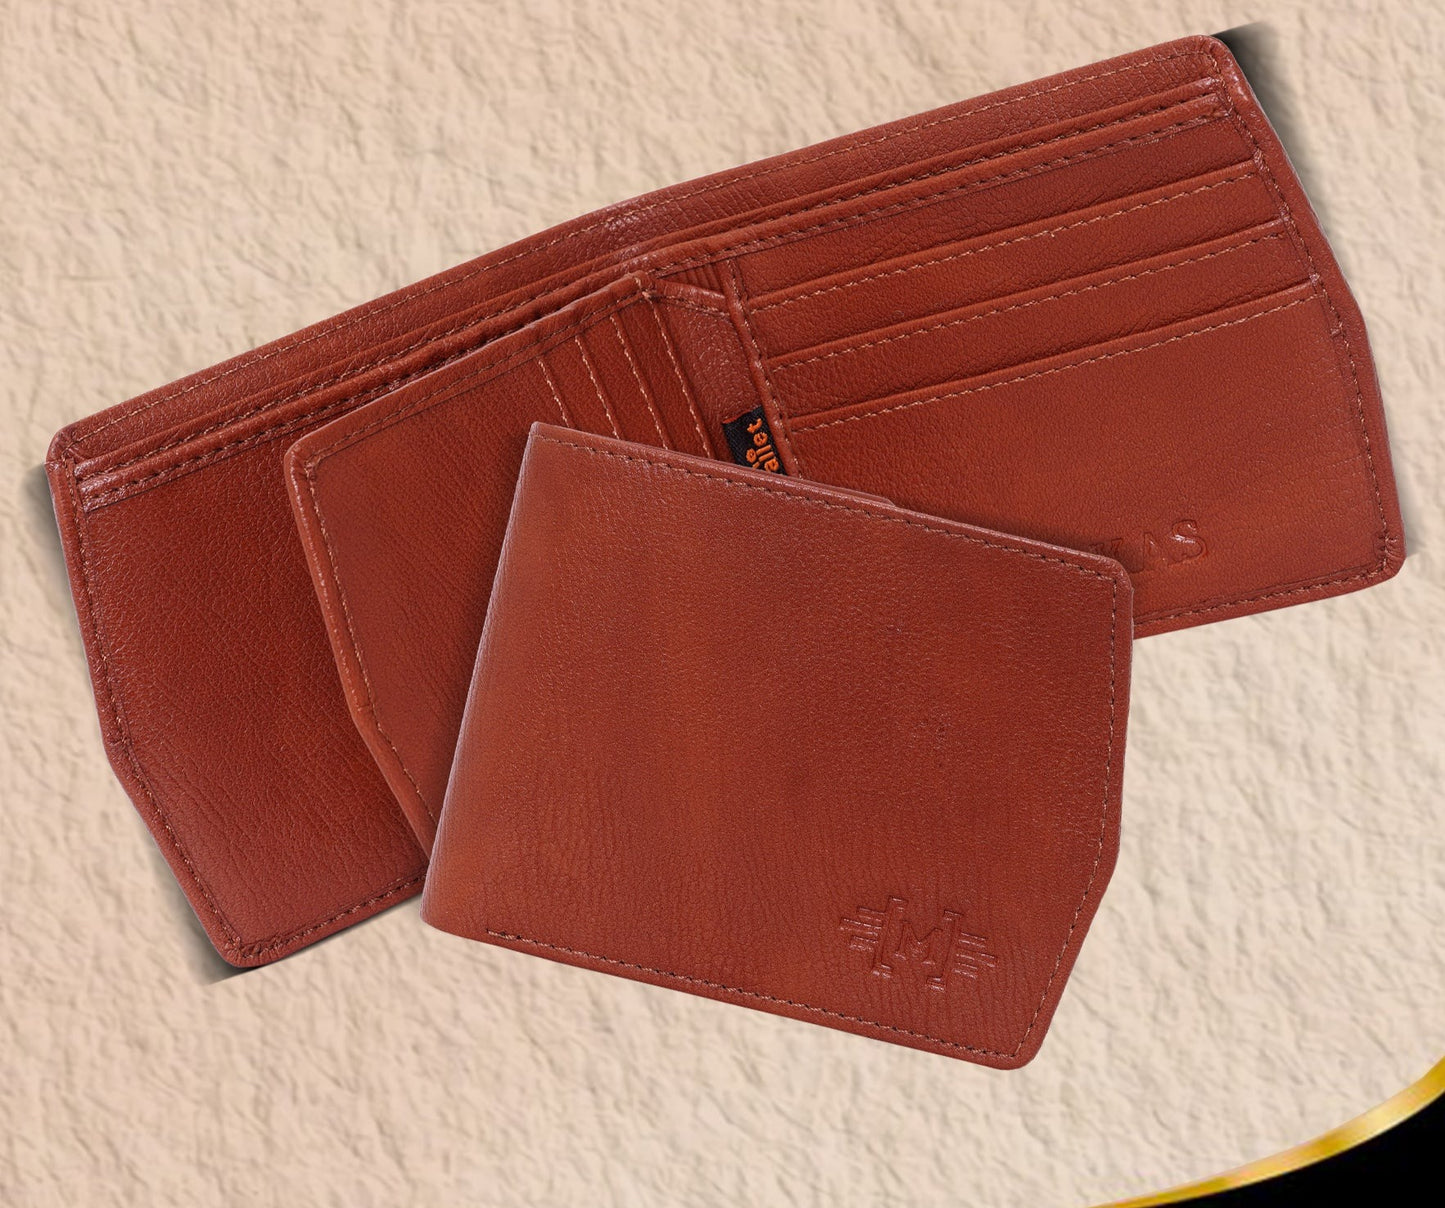 Card Wallet | Minimalist Design for Men's Everyday Use